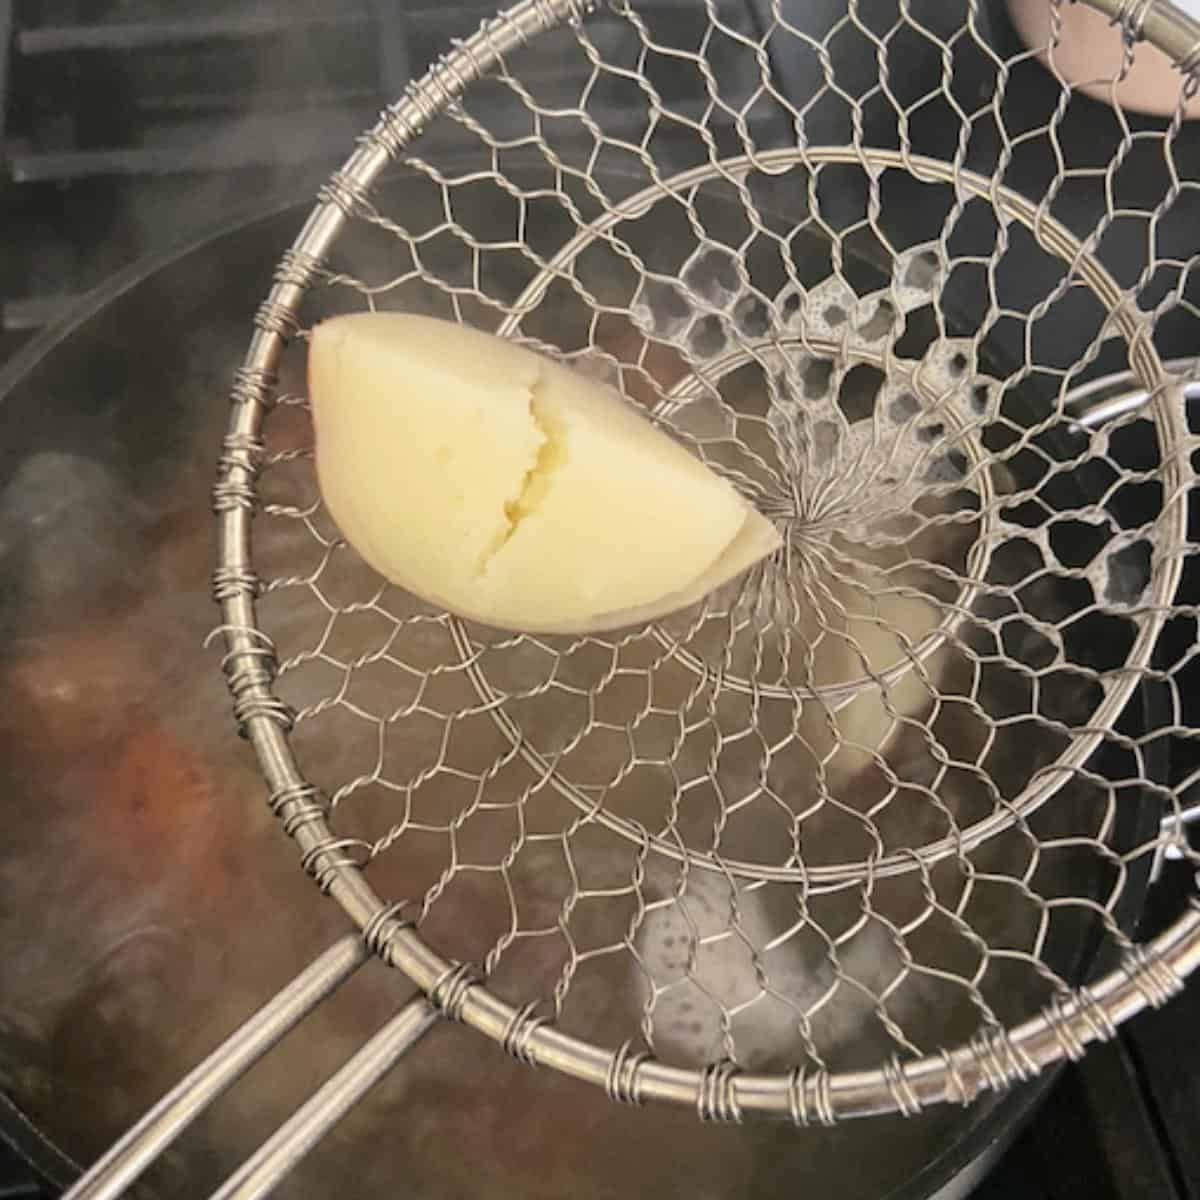 colander spoon showing potato that has been cooked entirely